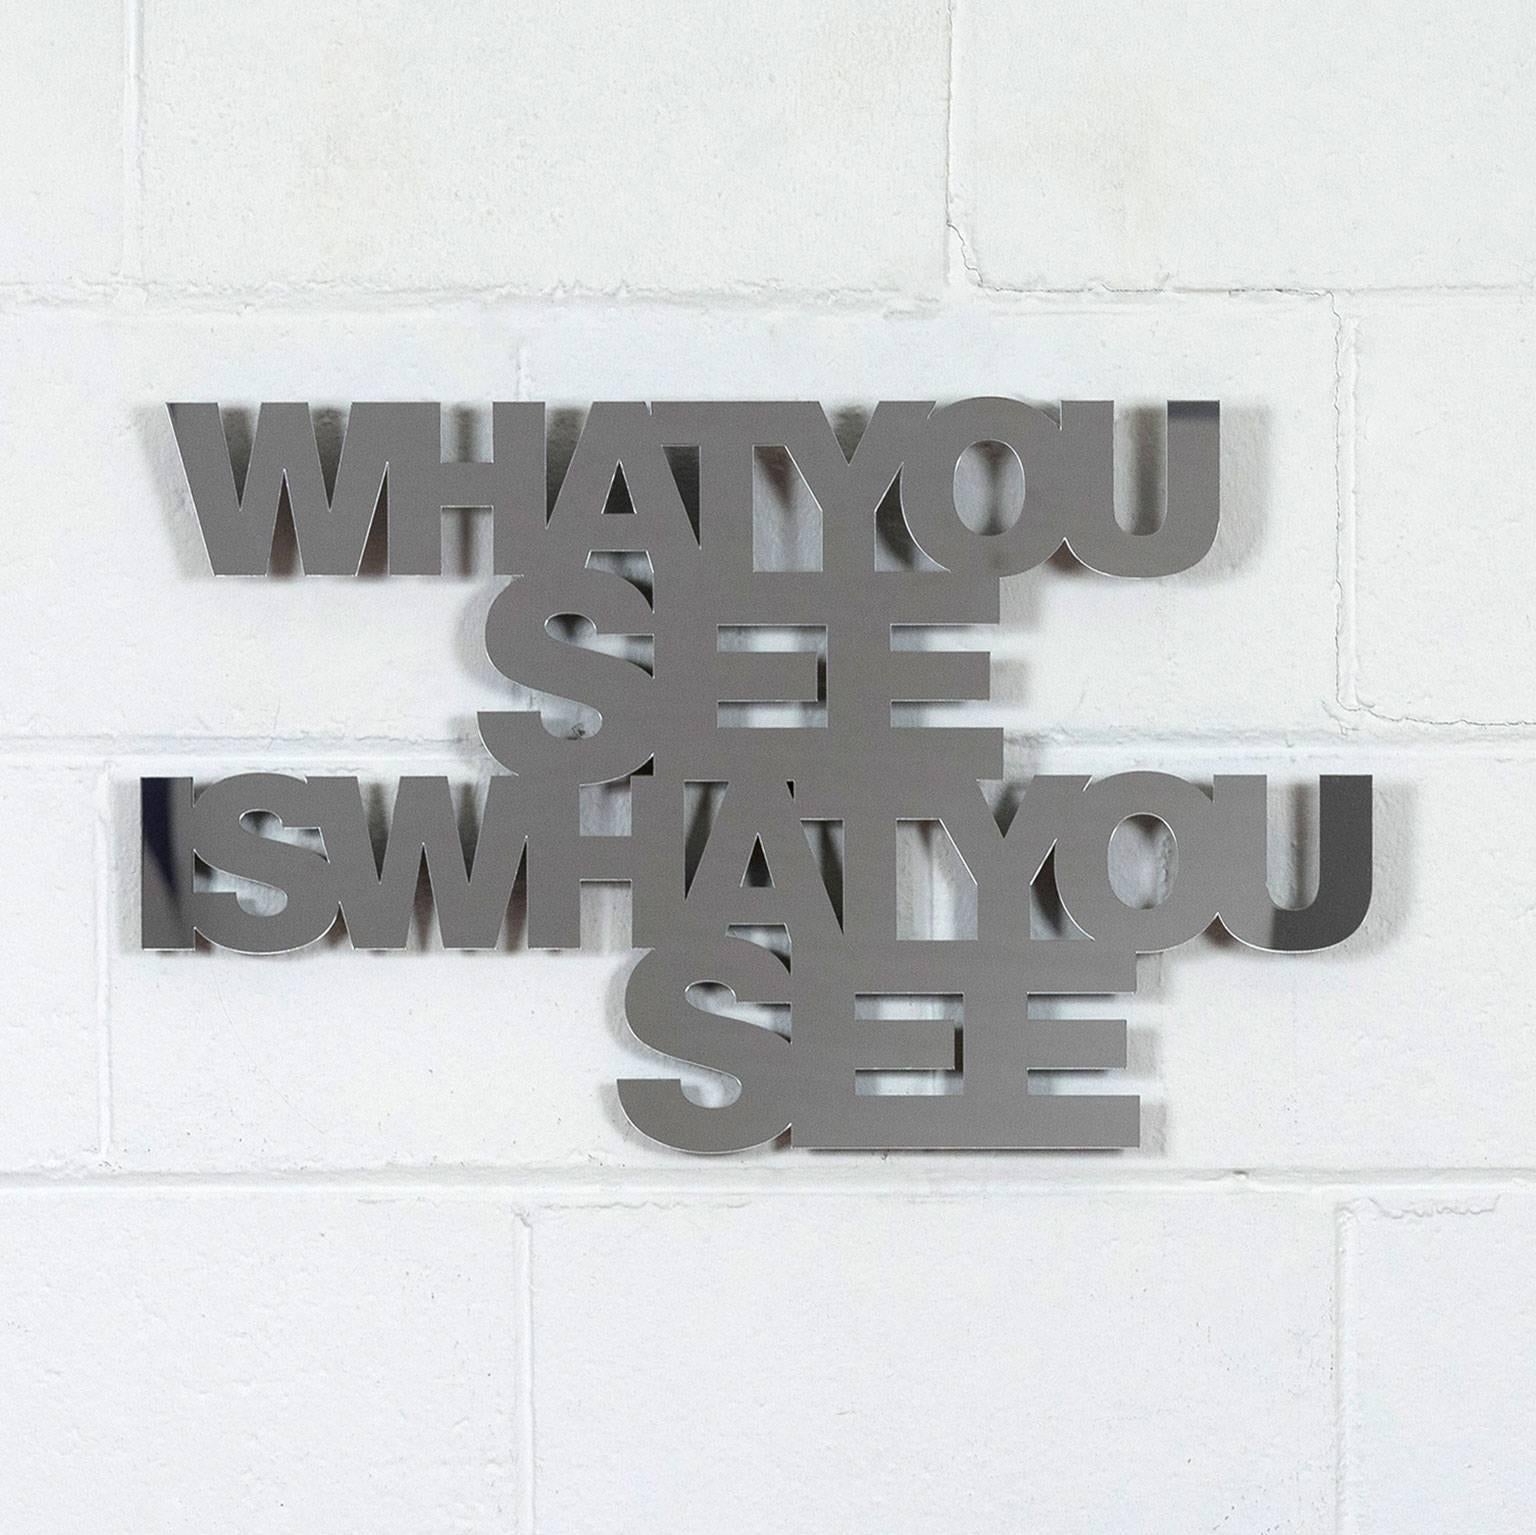 Caviar20 discovered, and then fell-in-love with, Jade Rude thanks to her iconic and hugely successful wall mirror sculpture "You Look Great".

Jade Rude has created a new work on silver mirror acrylic featuring the clever slogan "What You See Is